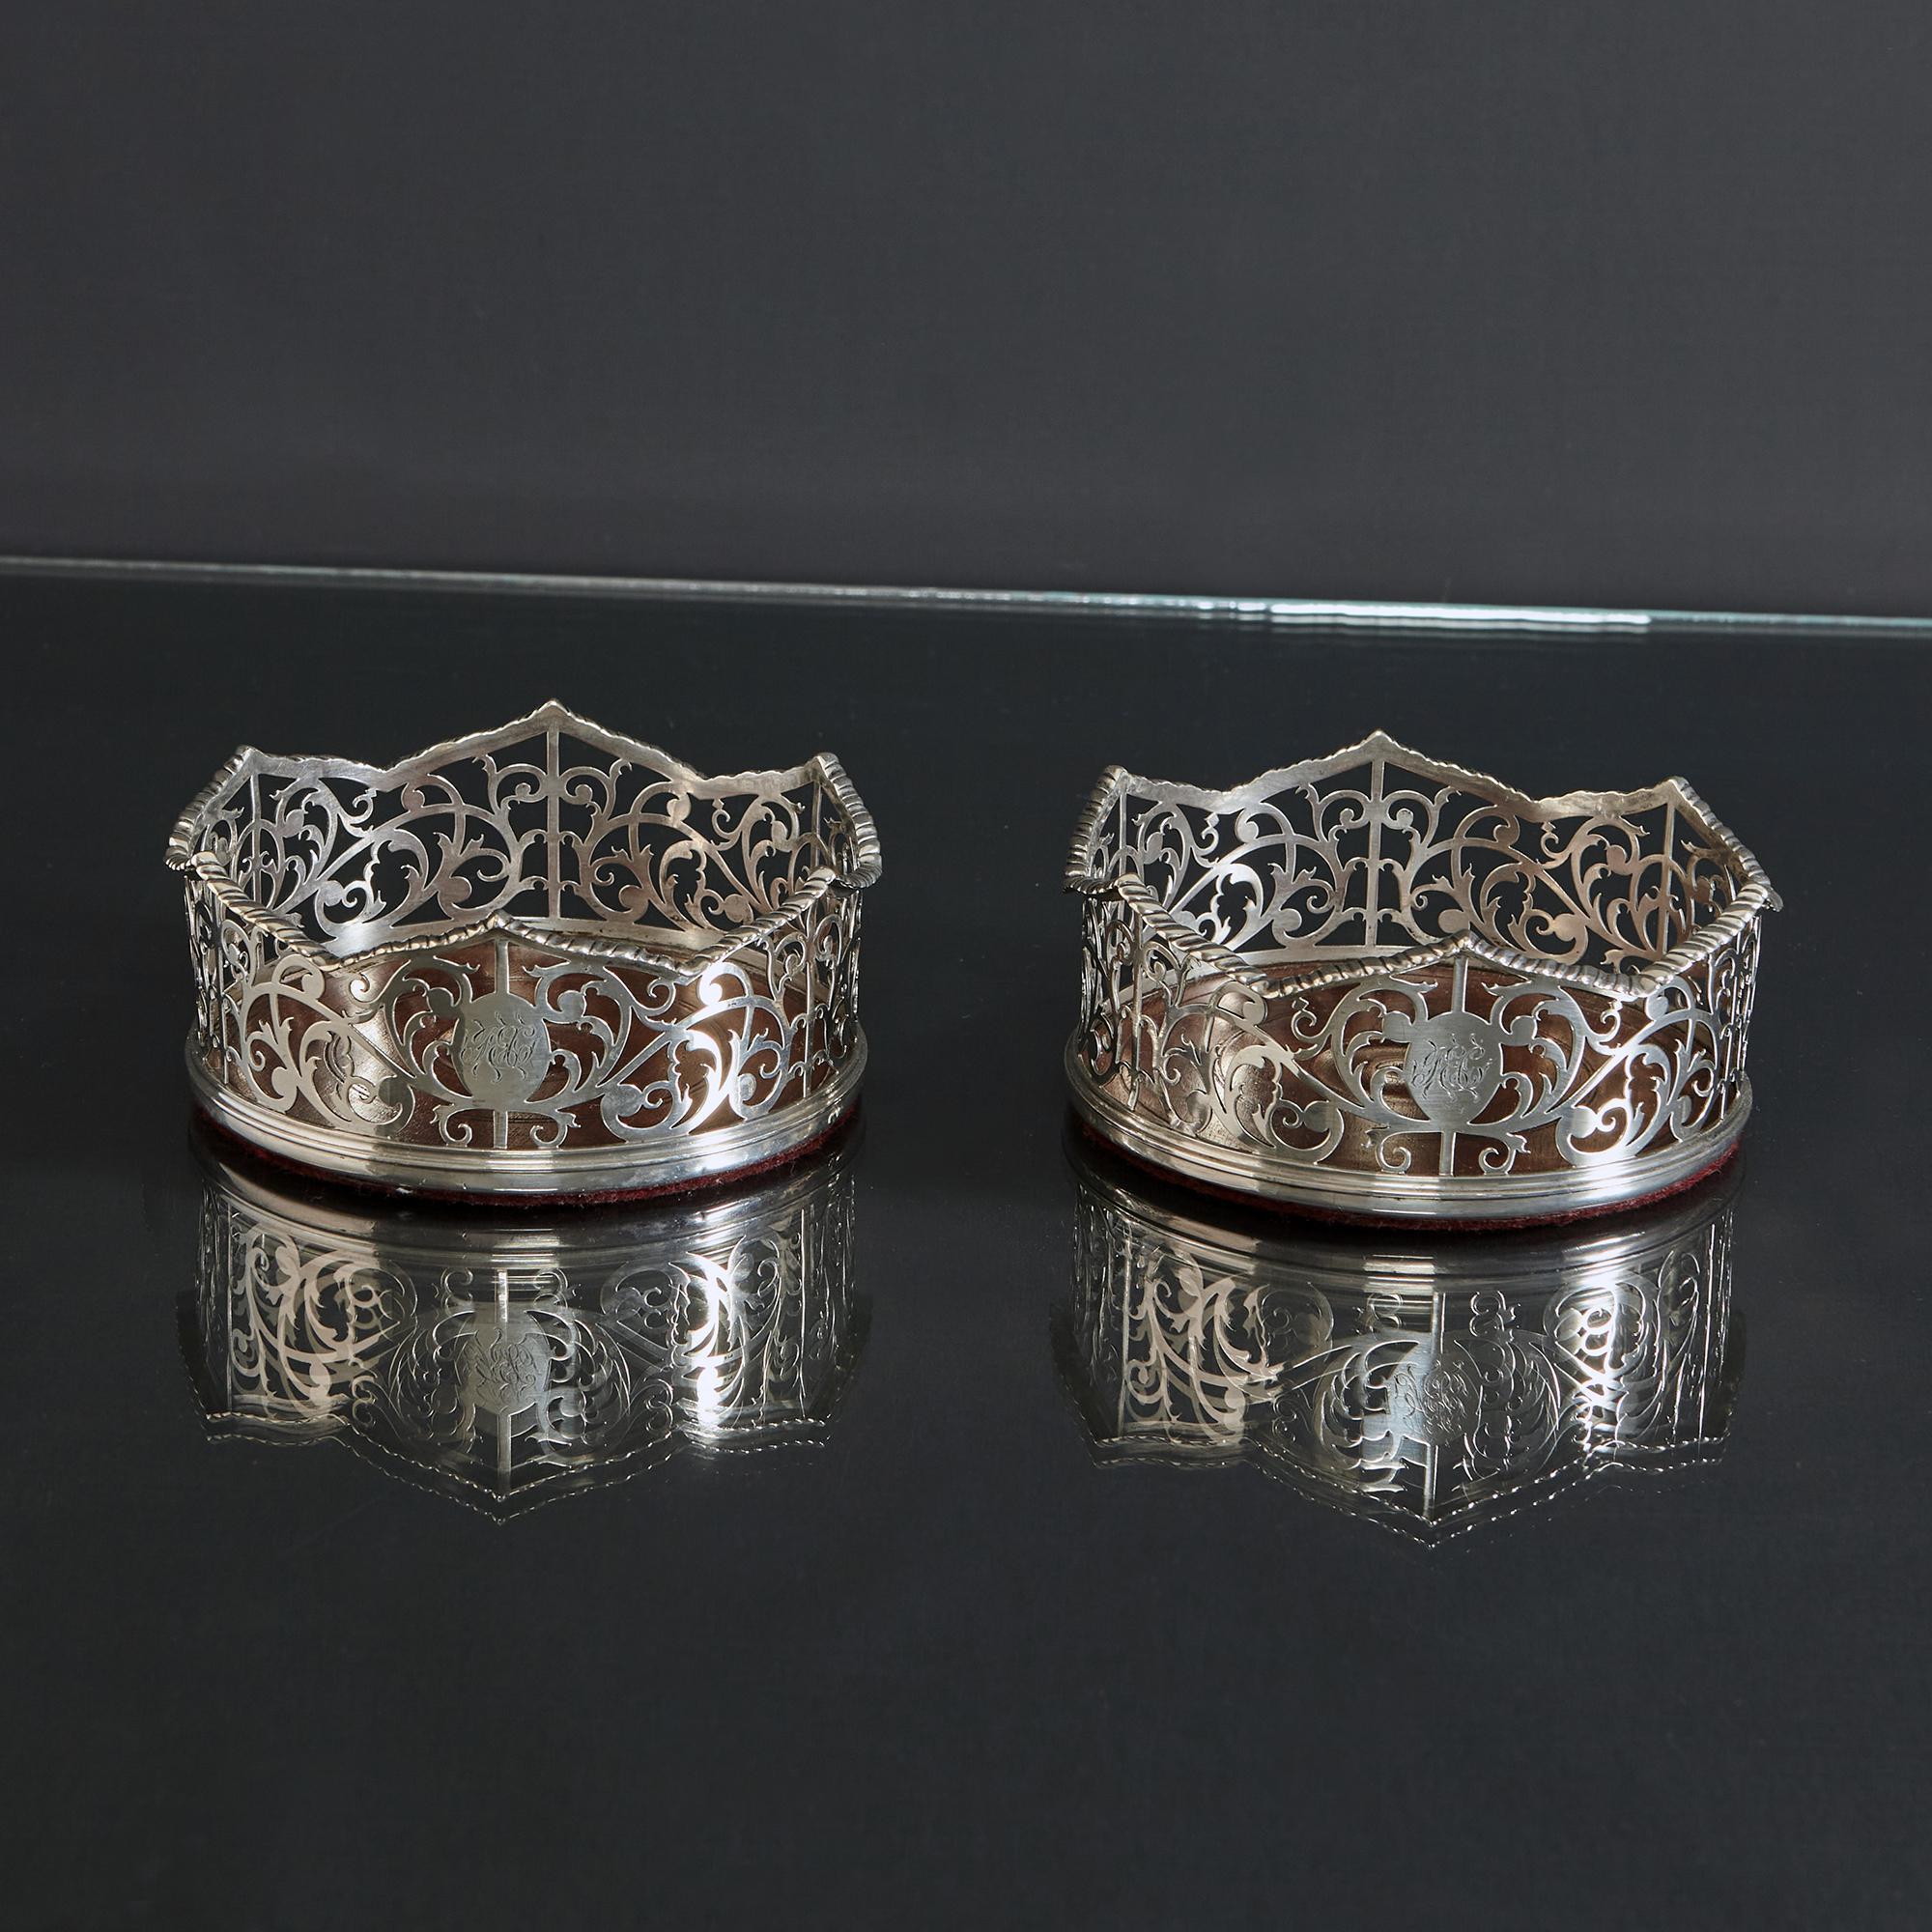 Pair of lovely antique silver wine bottle or decanter coasters, with hand-pierced openwork sides, decorated with a scrolling leaf design and their original wood bases. The scalloped borders feature applied gadroon pattern mounts and each has a